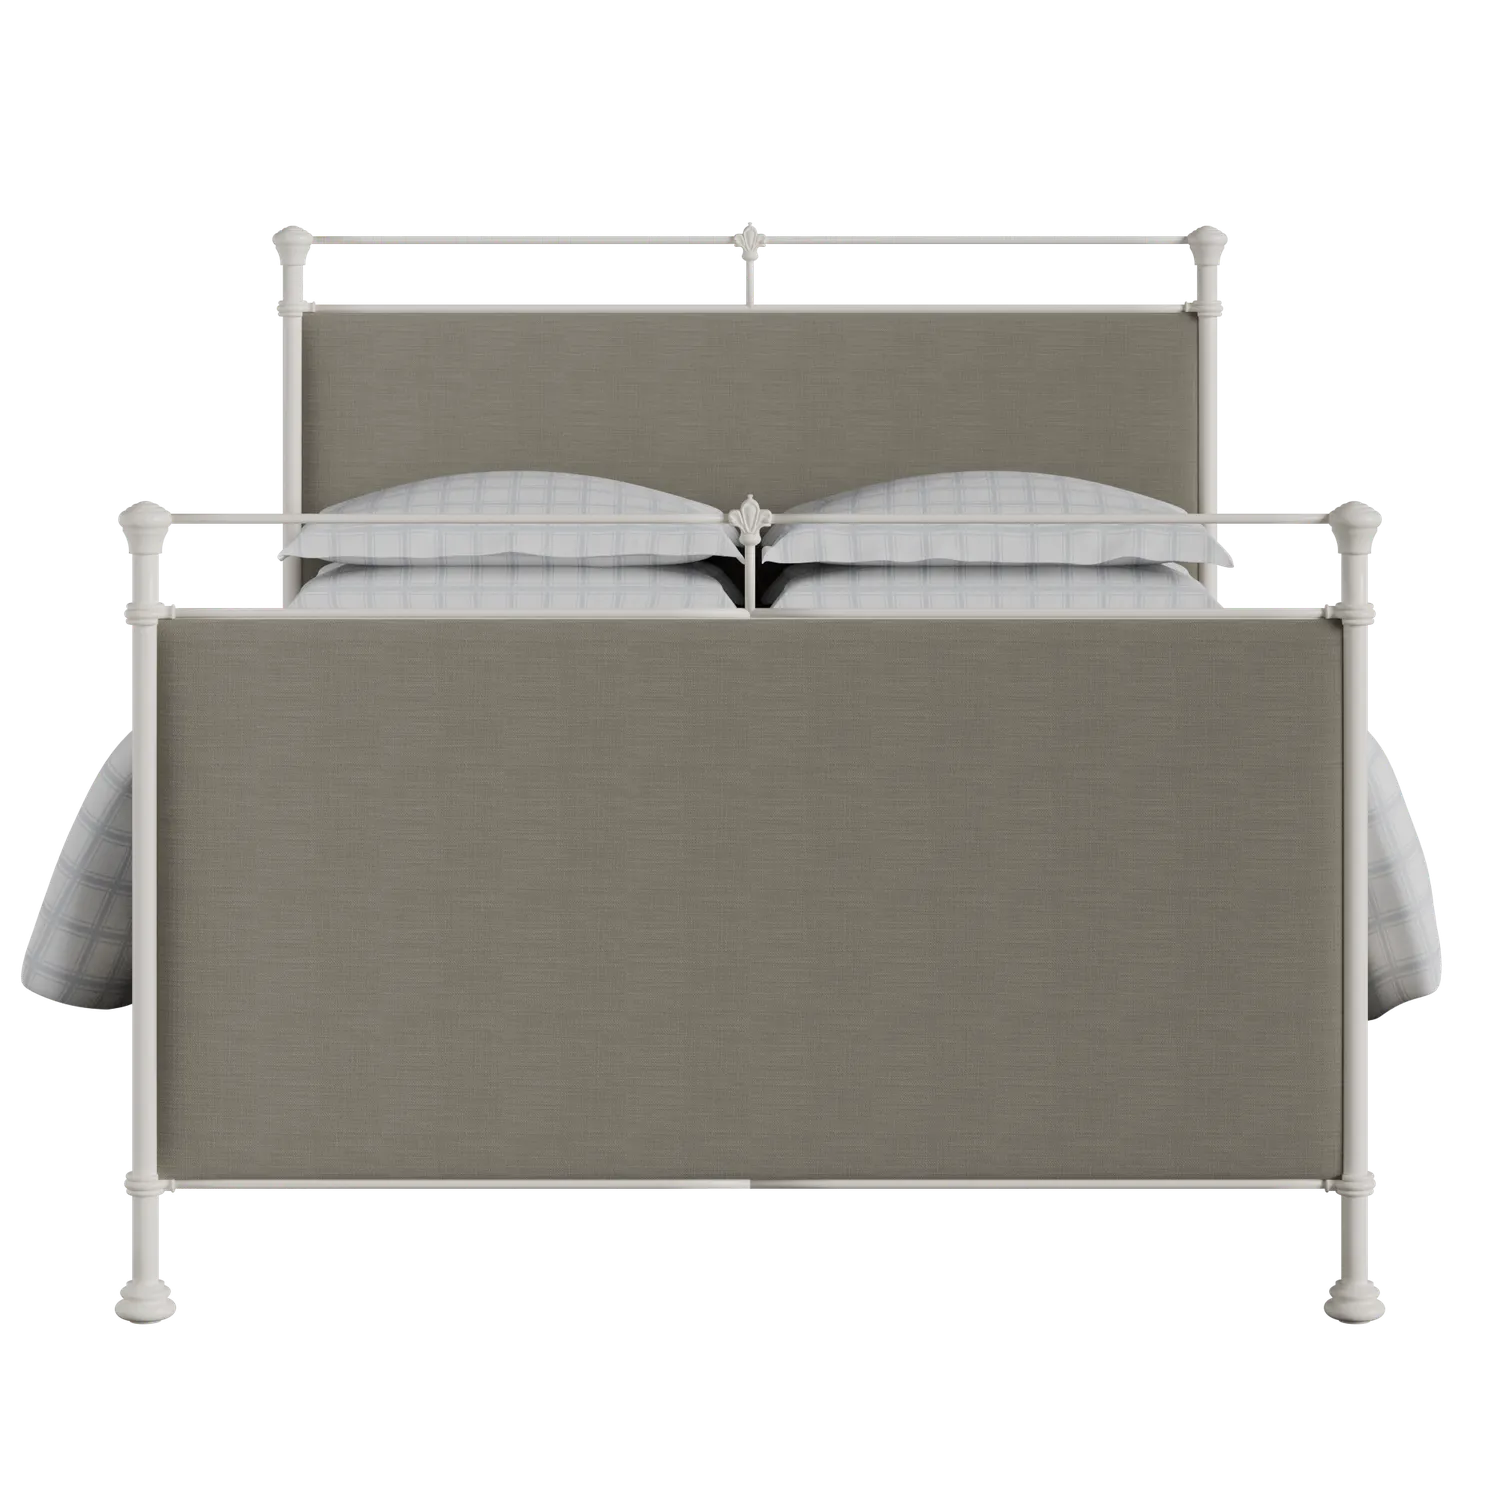 Lille iron/metal upholstered bed in ivory with grey fabric